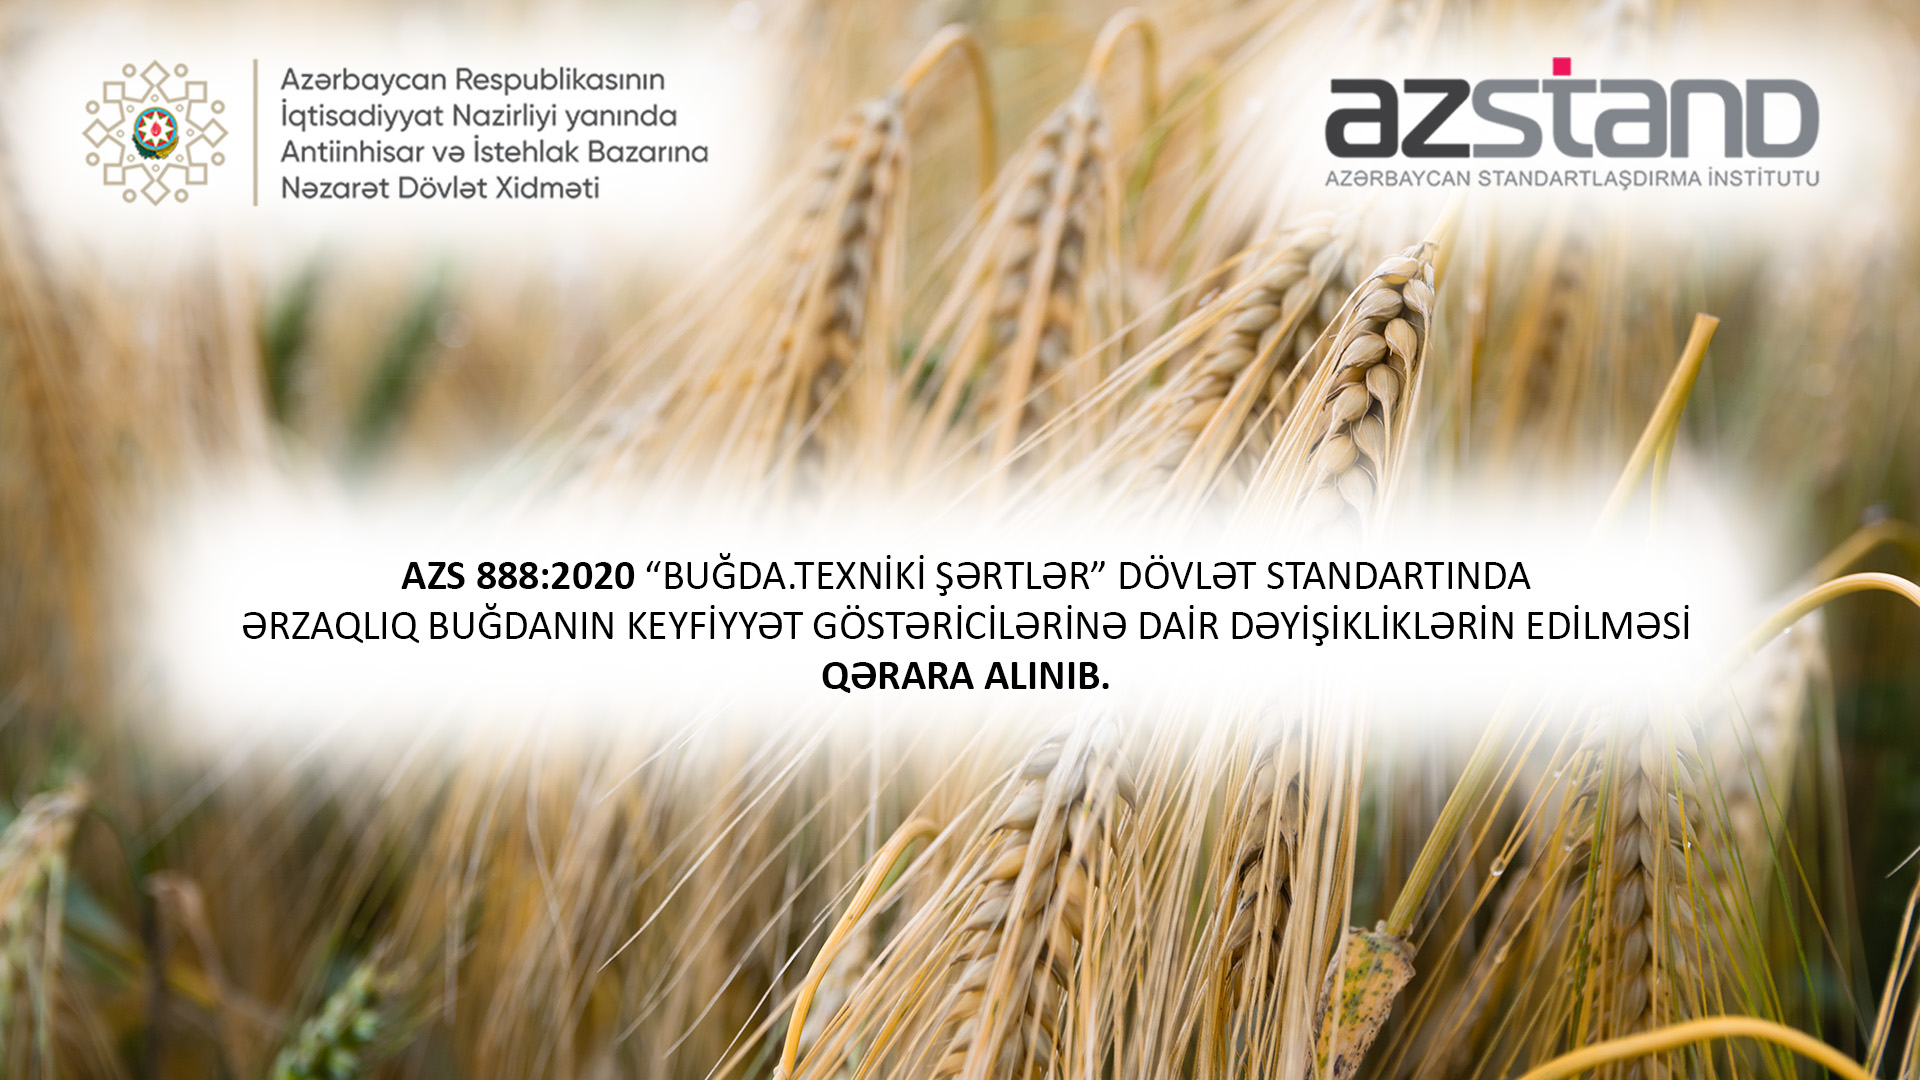 The requirements for the quality indicators of consumable wheat have been revised